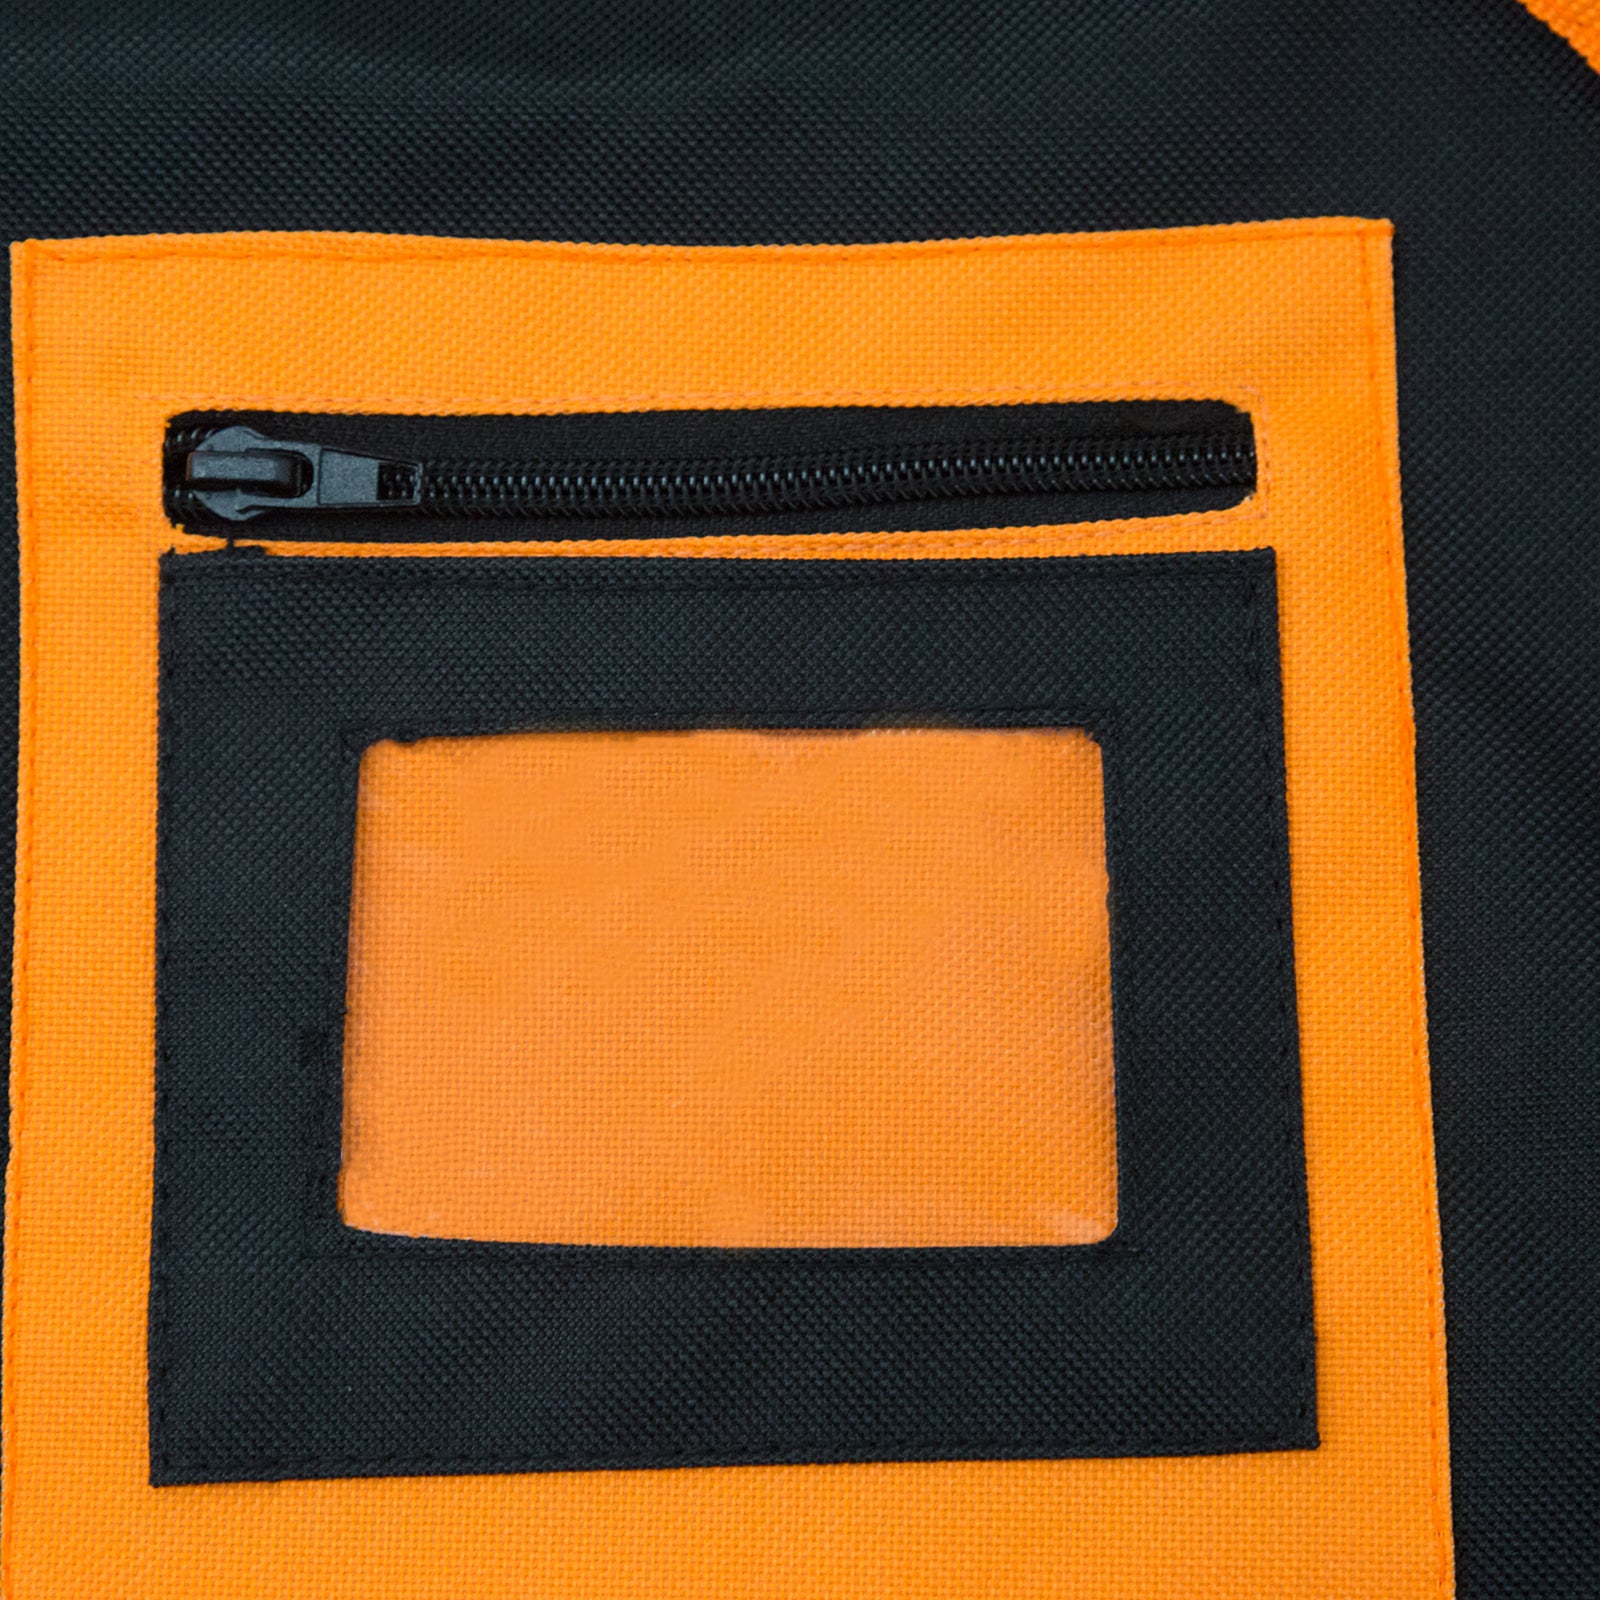 Close up of the PVC transparent pocket to place ID badges on the chest of the black and orange tool vest